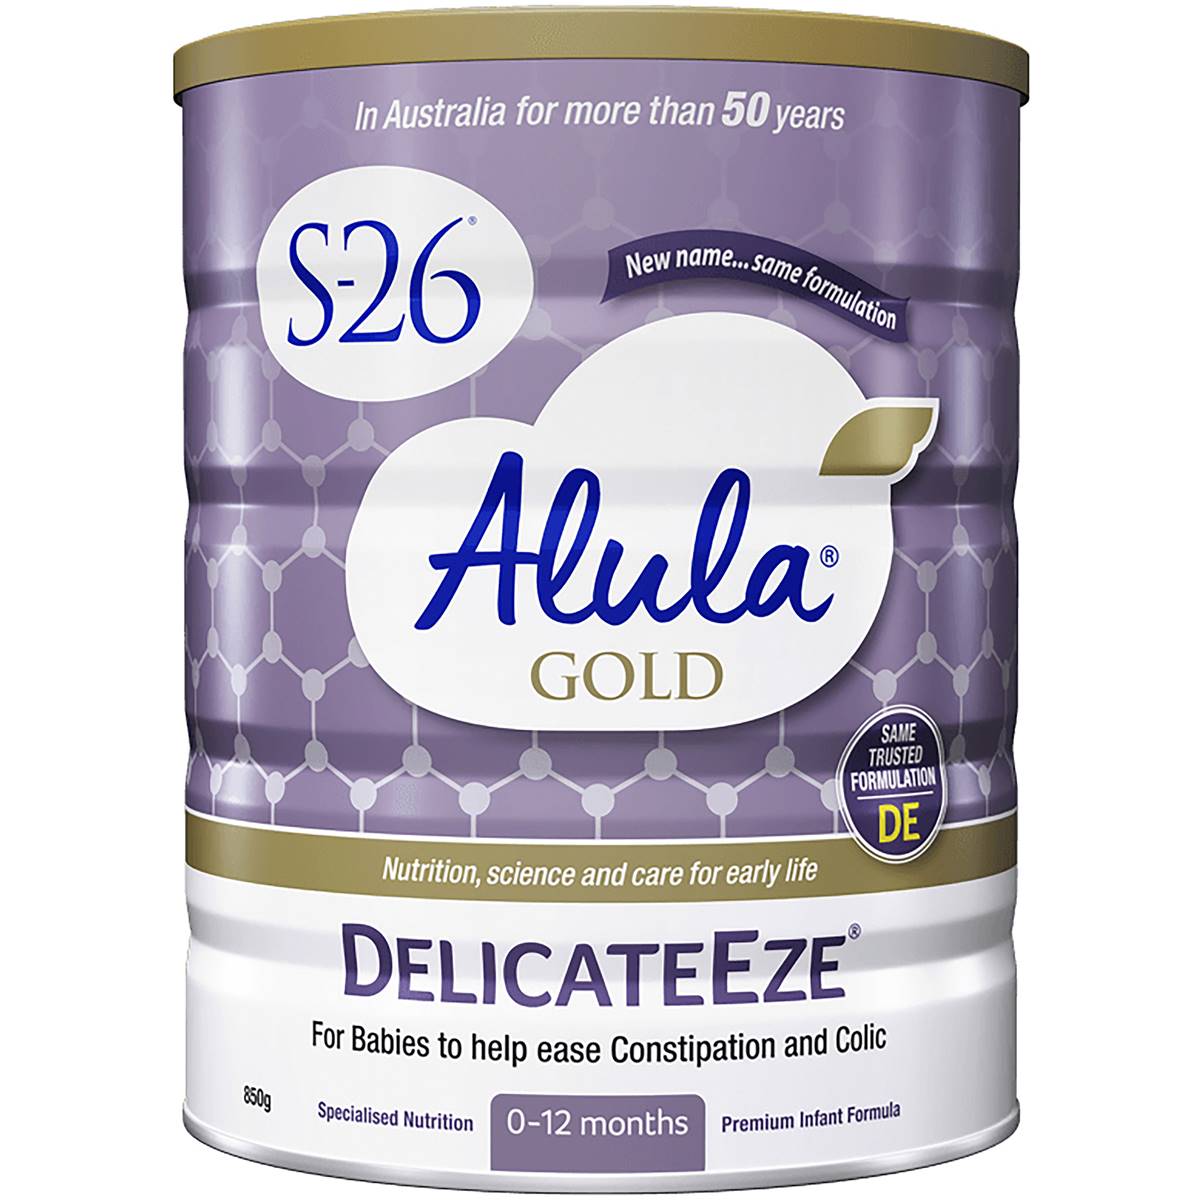 Calories in S-26 Alula Gold Delicateeze 0 - 12 Months